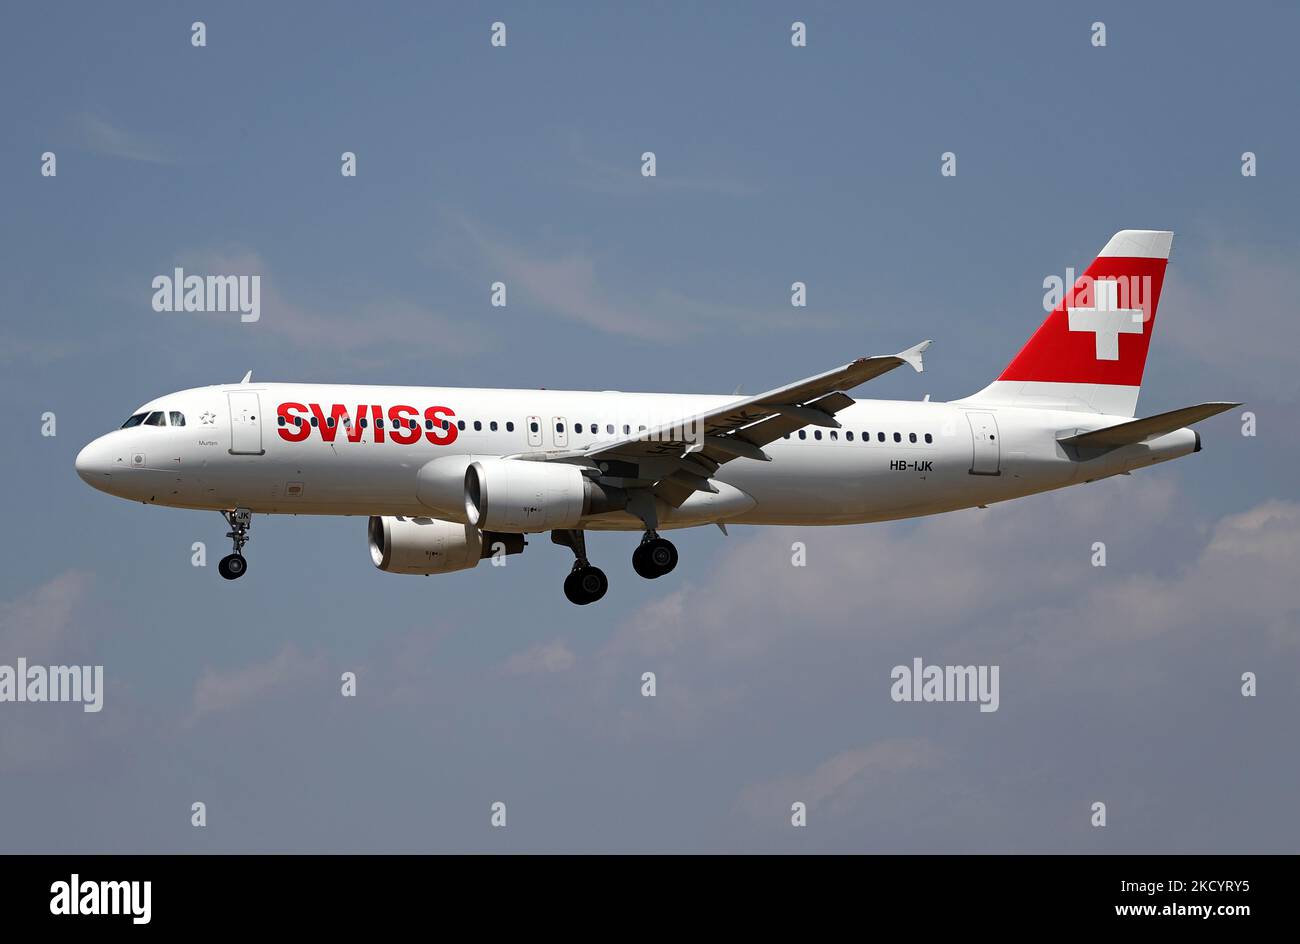 Airbus A320-200 plane, of the Swiss International Air Lines company, getting ready to land at Barcelona airport, in Barcelona on 06th August 2021. -- (Photo by Urbanandsport/NurPhoto) Stock Photo